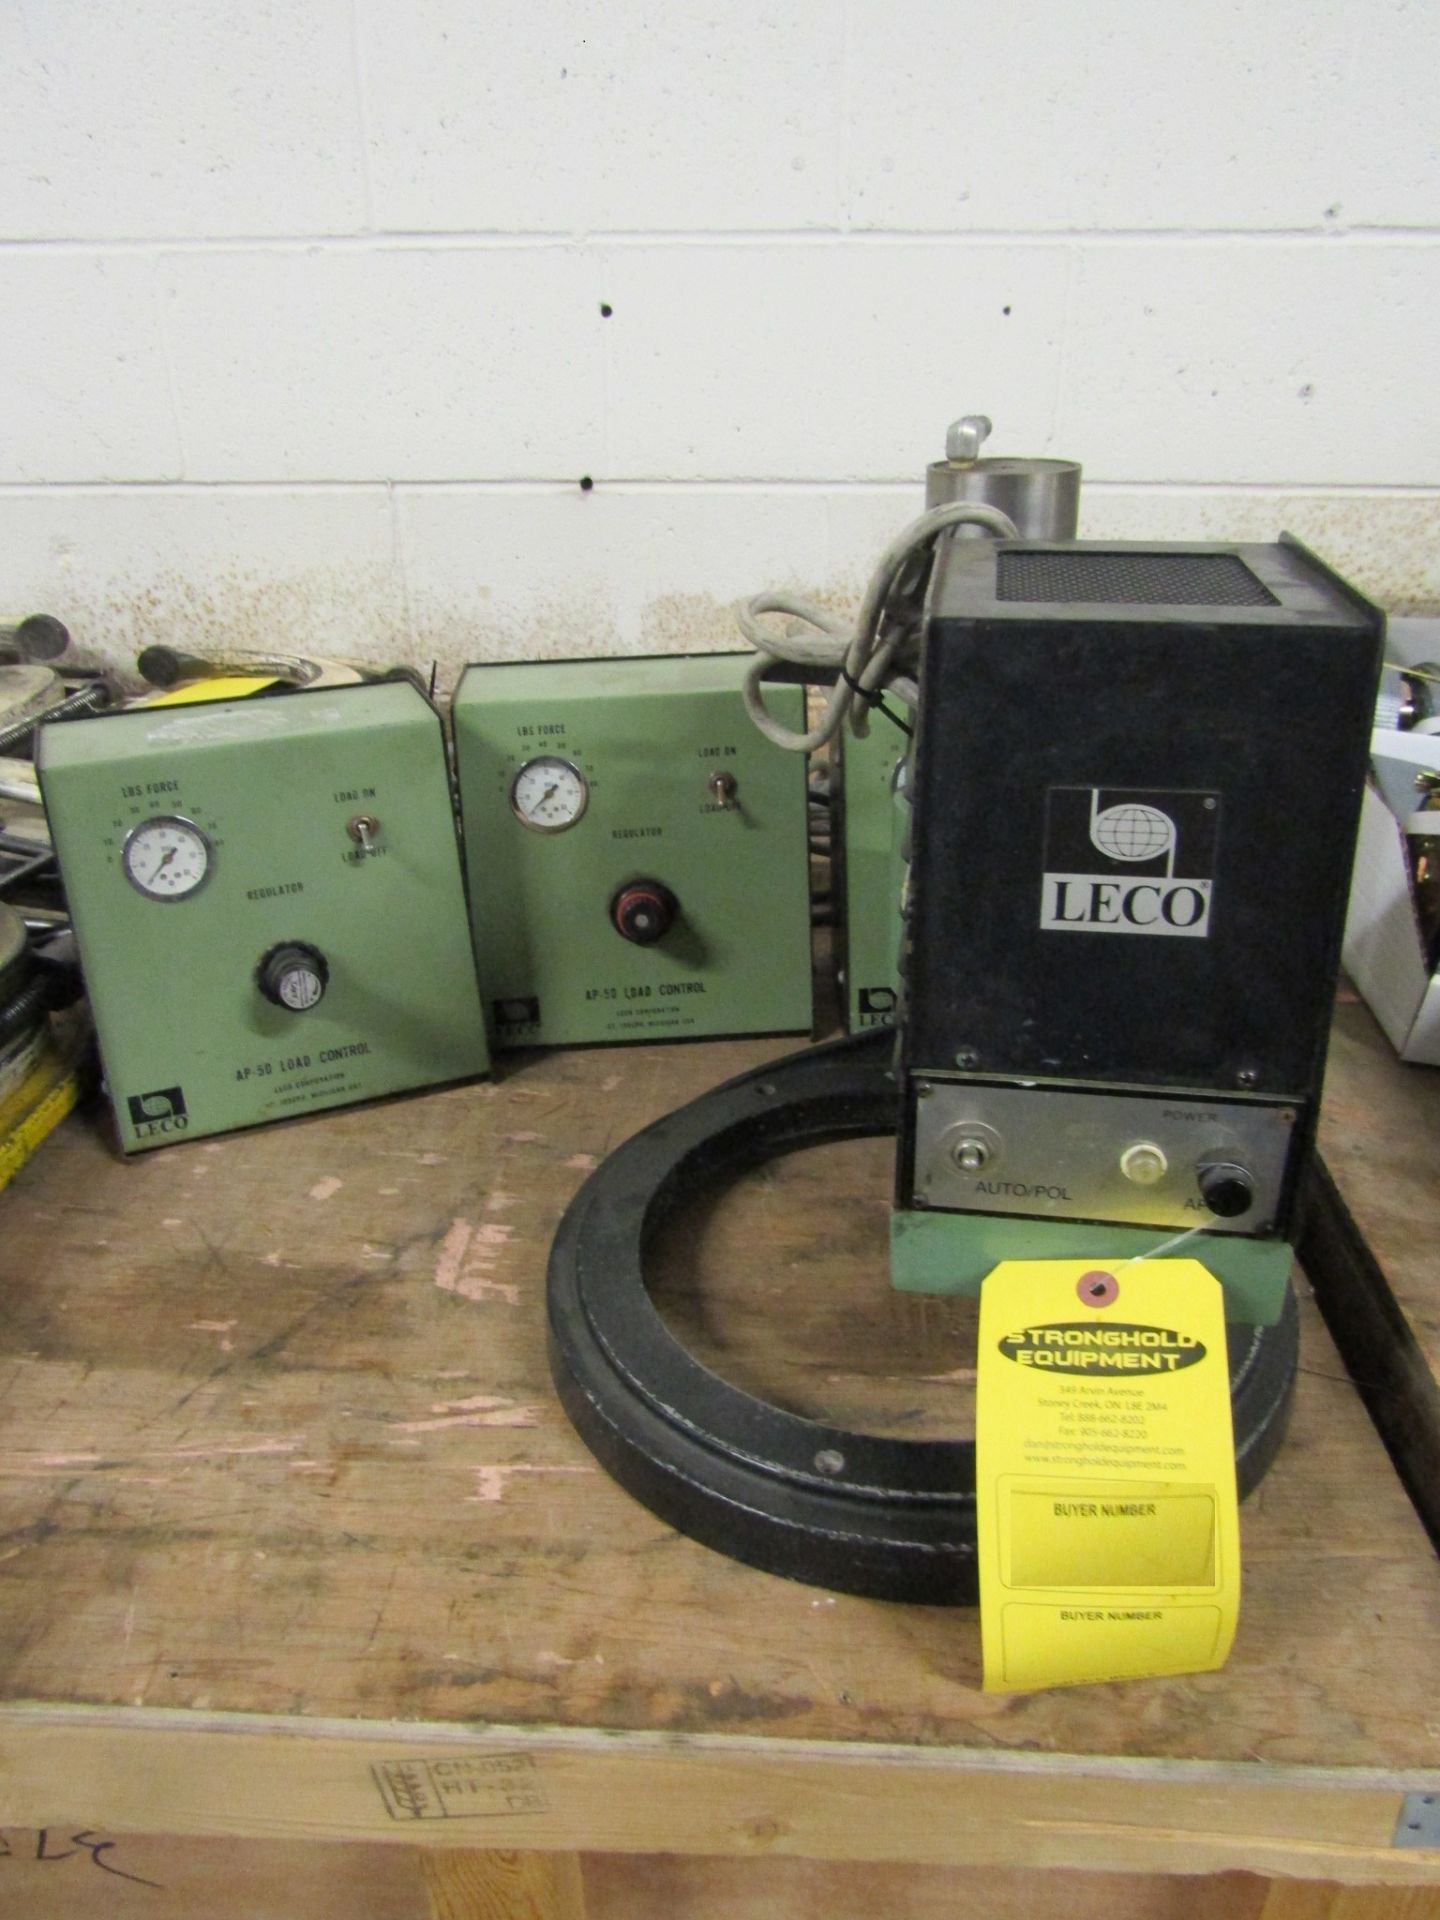 Leco Precision Force Gauge unit with multiple controllers